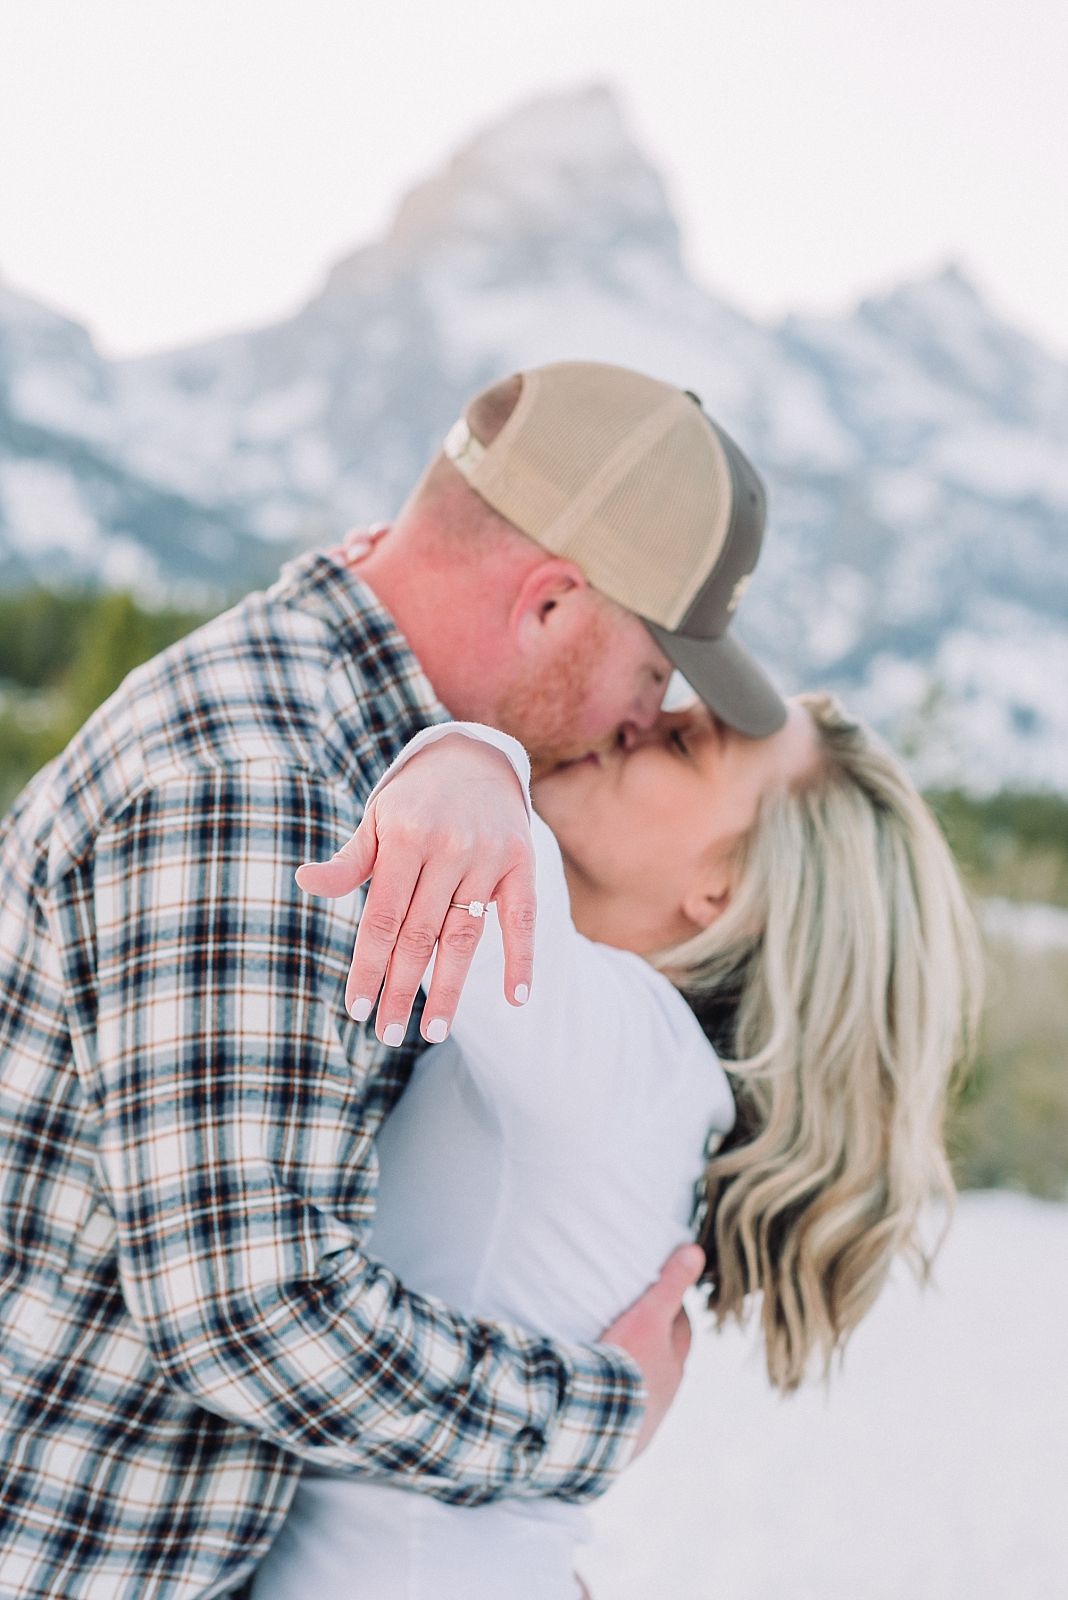 Snowy Jackson Hole Proposal, winter engagement photos, cool places to propose to my girlfriend, bucket list trips, engagement photographer